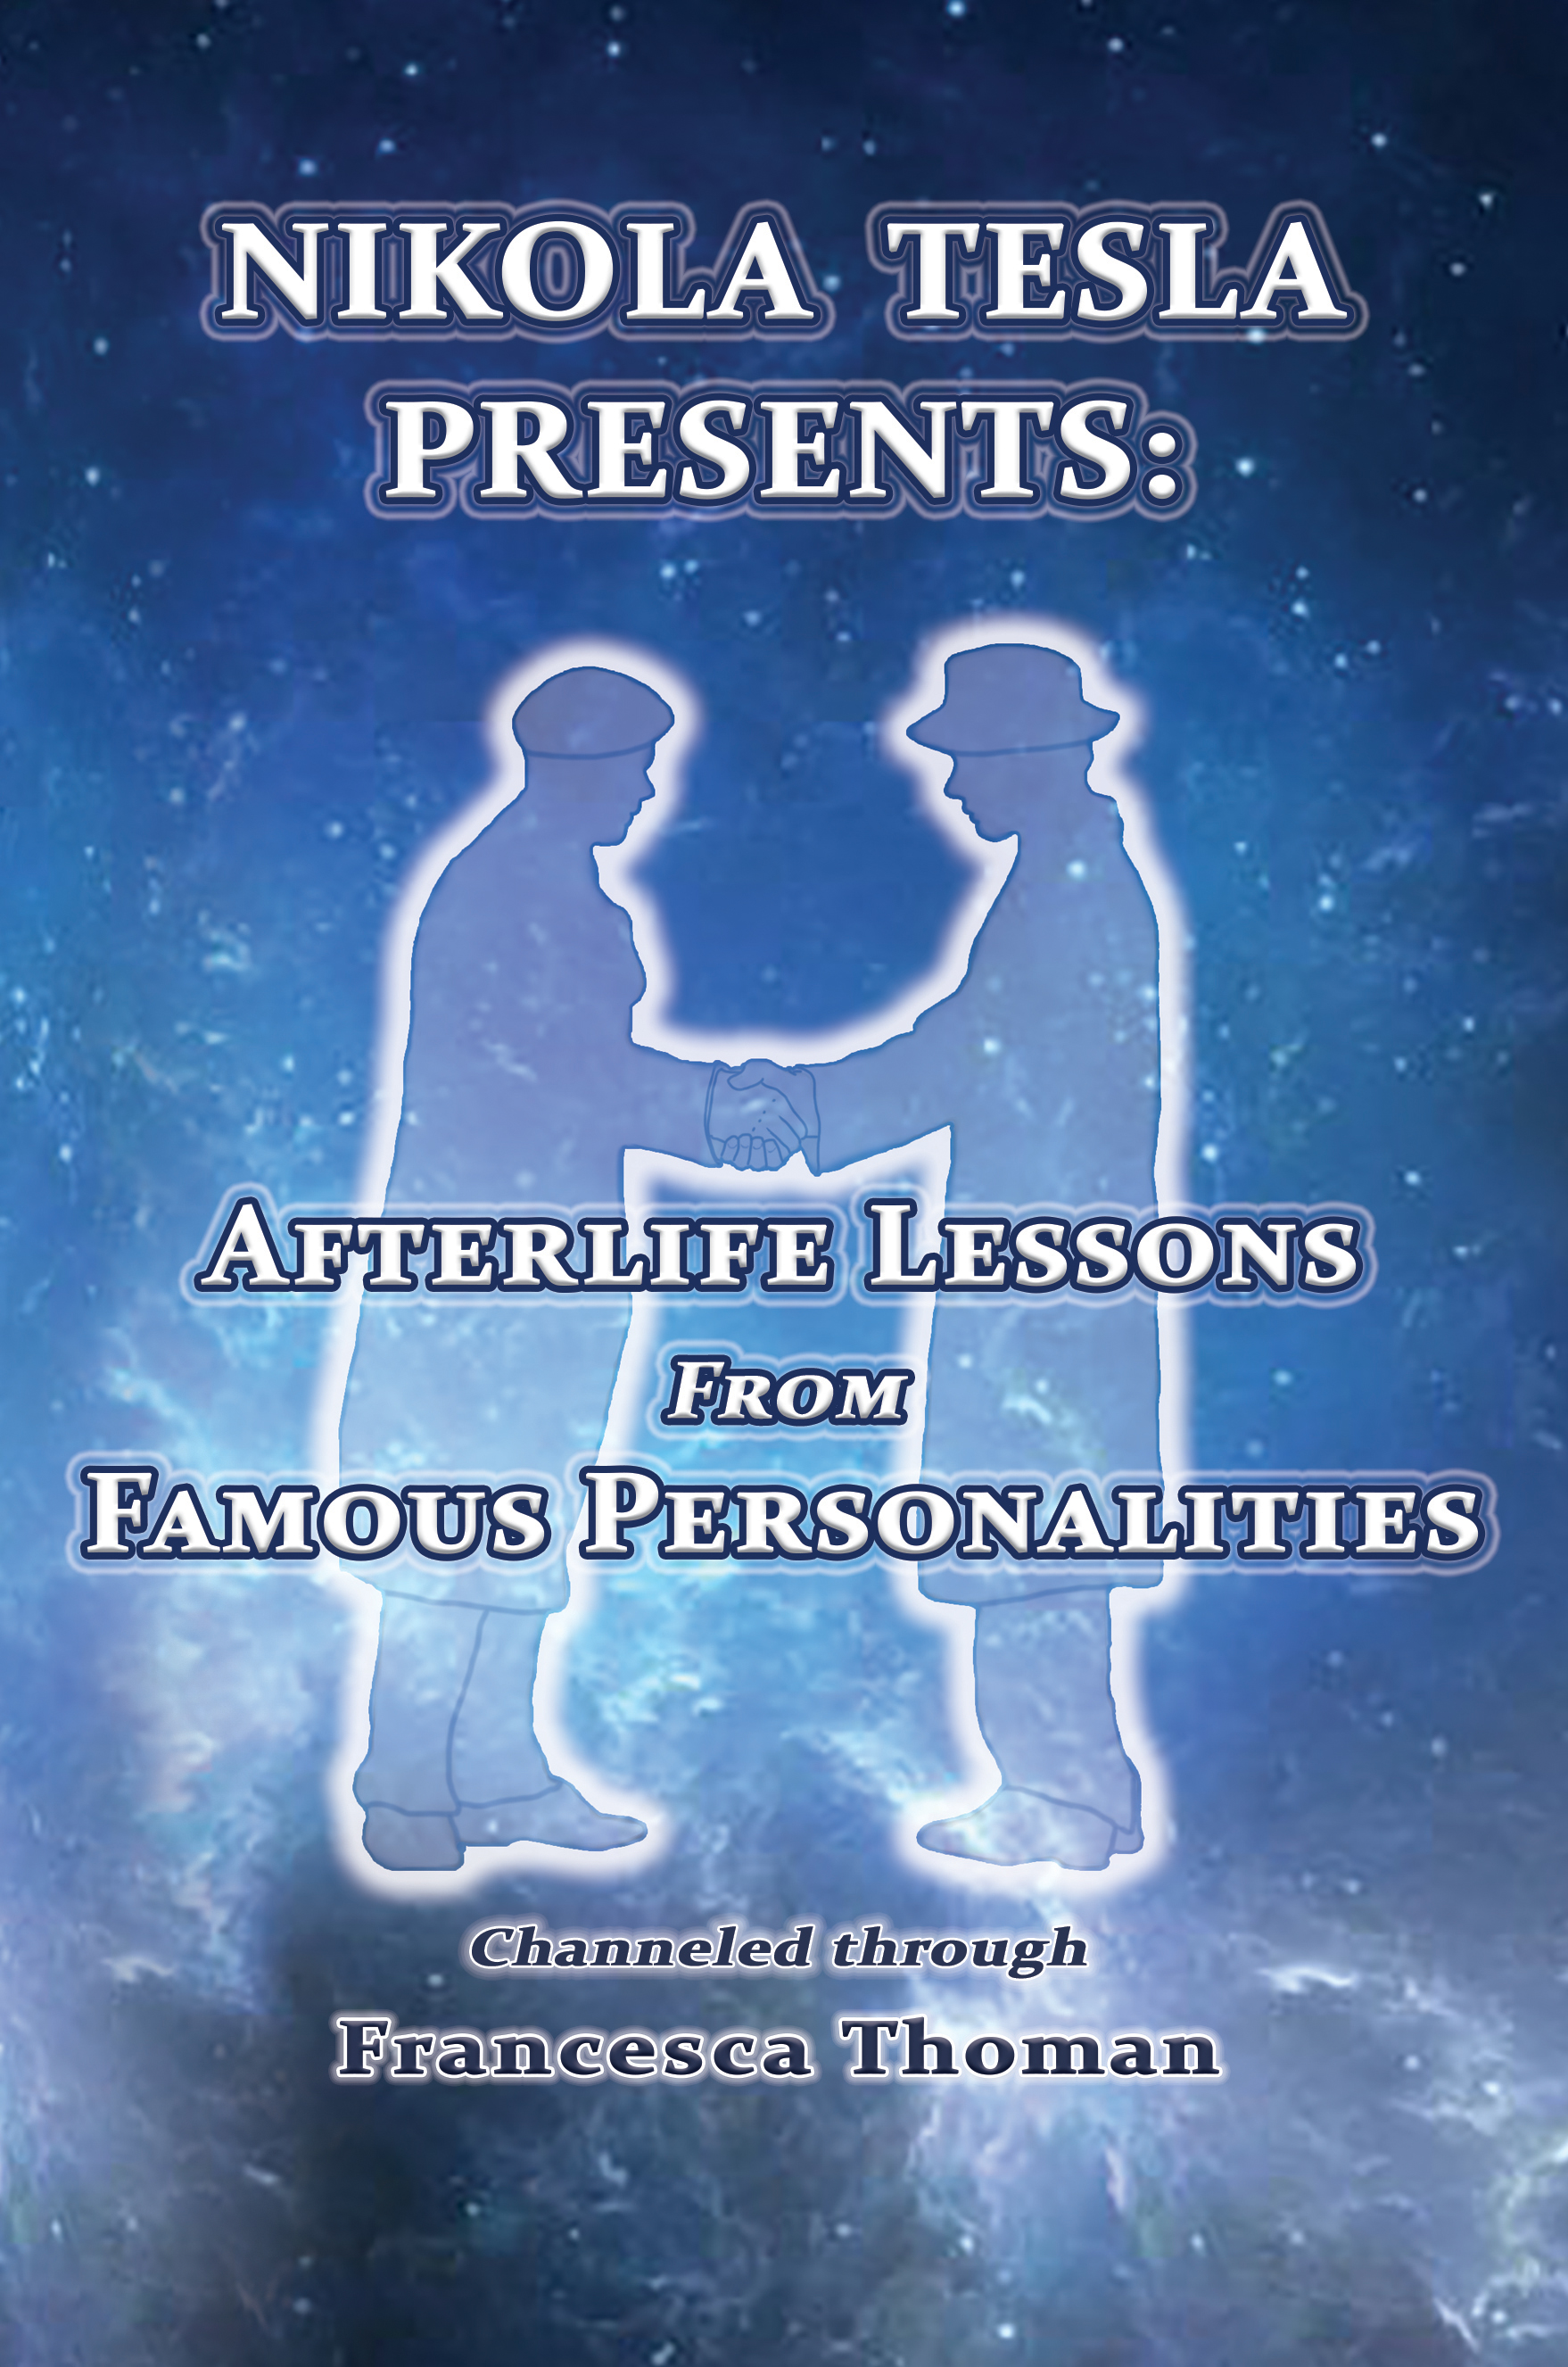 Nikola Tesla Presents: Afterlife Lessons from Famous Personalities